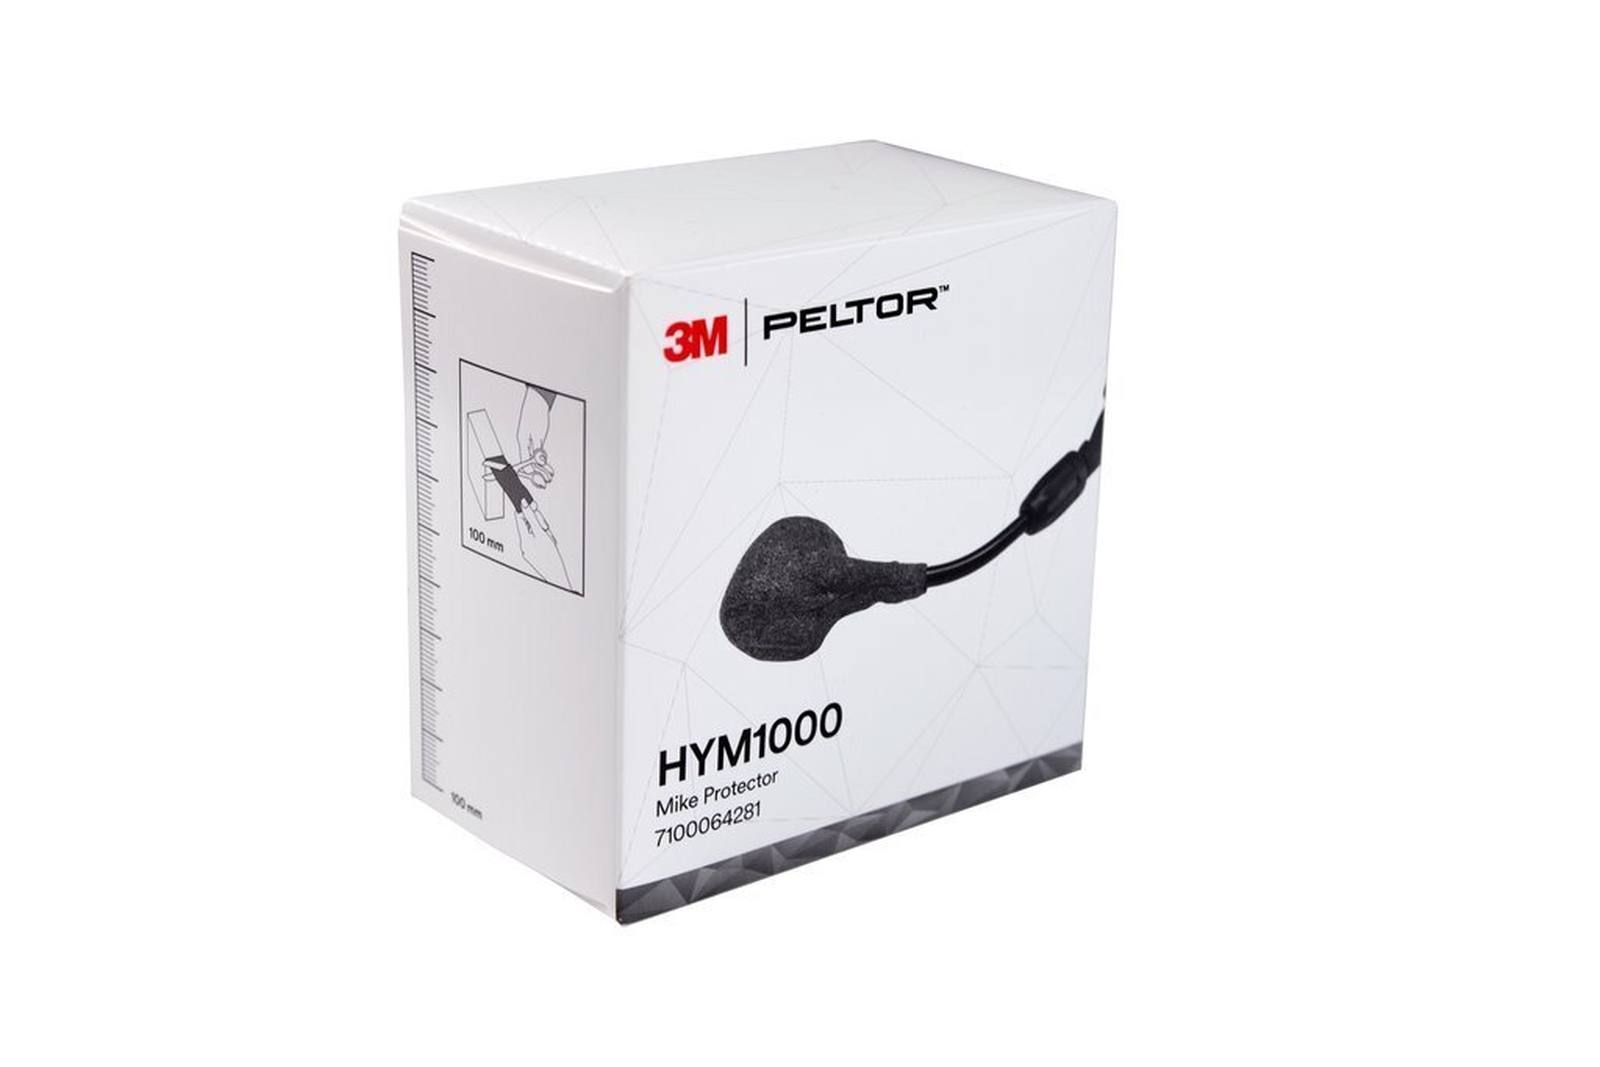 3M PELTOR Microphone protection tape, 5 m roll, grey, HYM1000